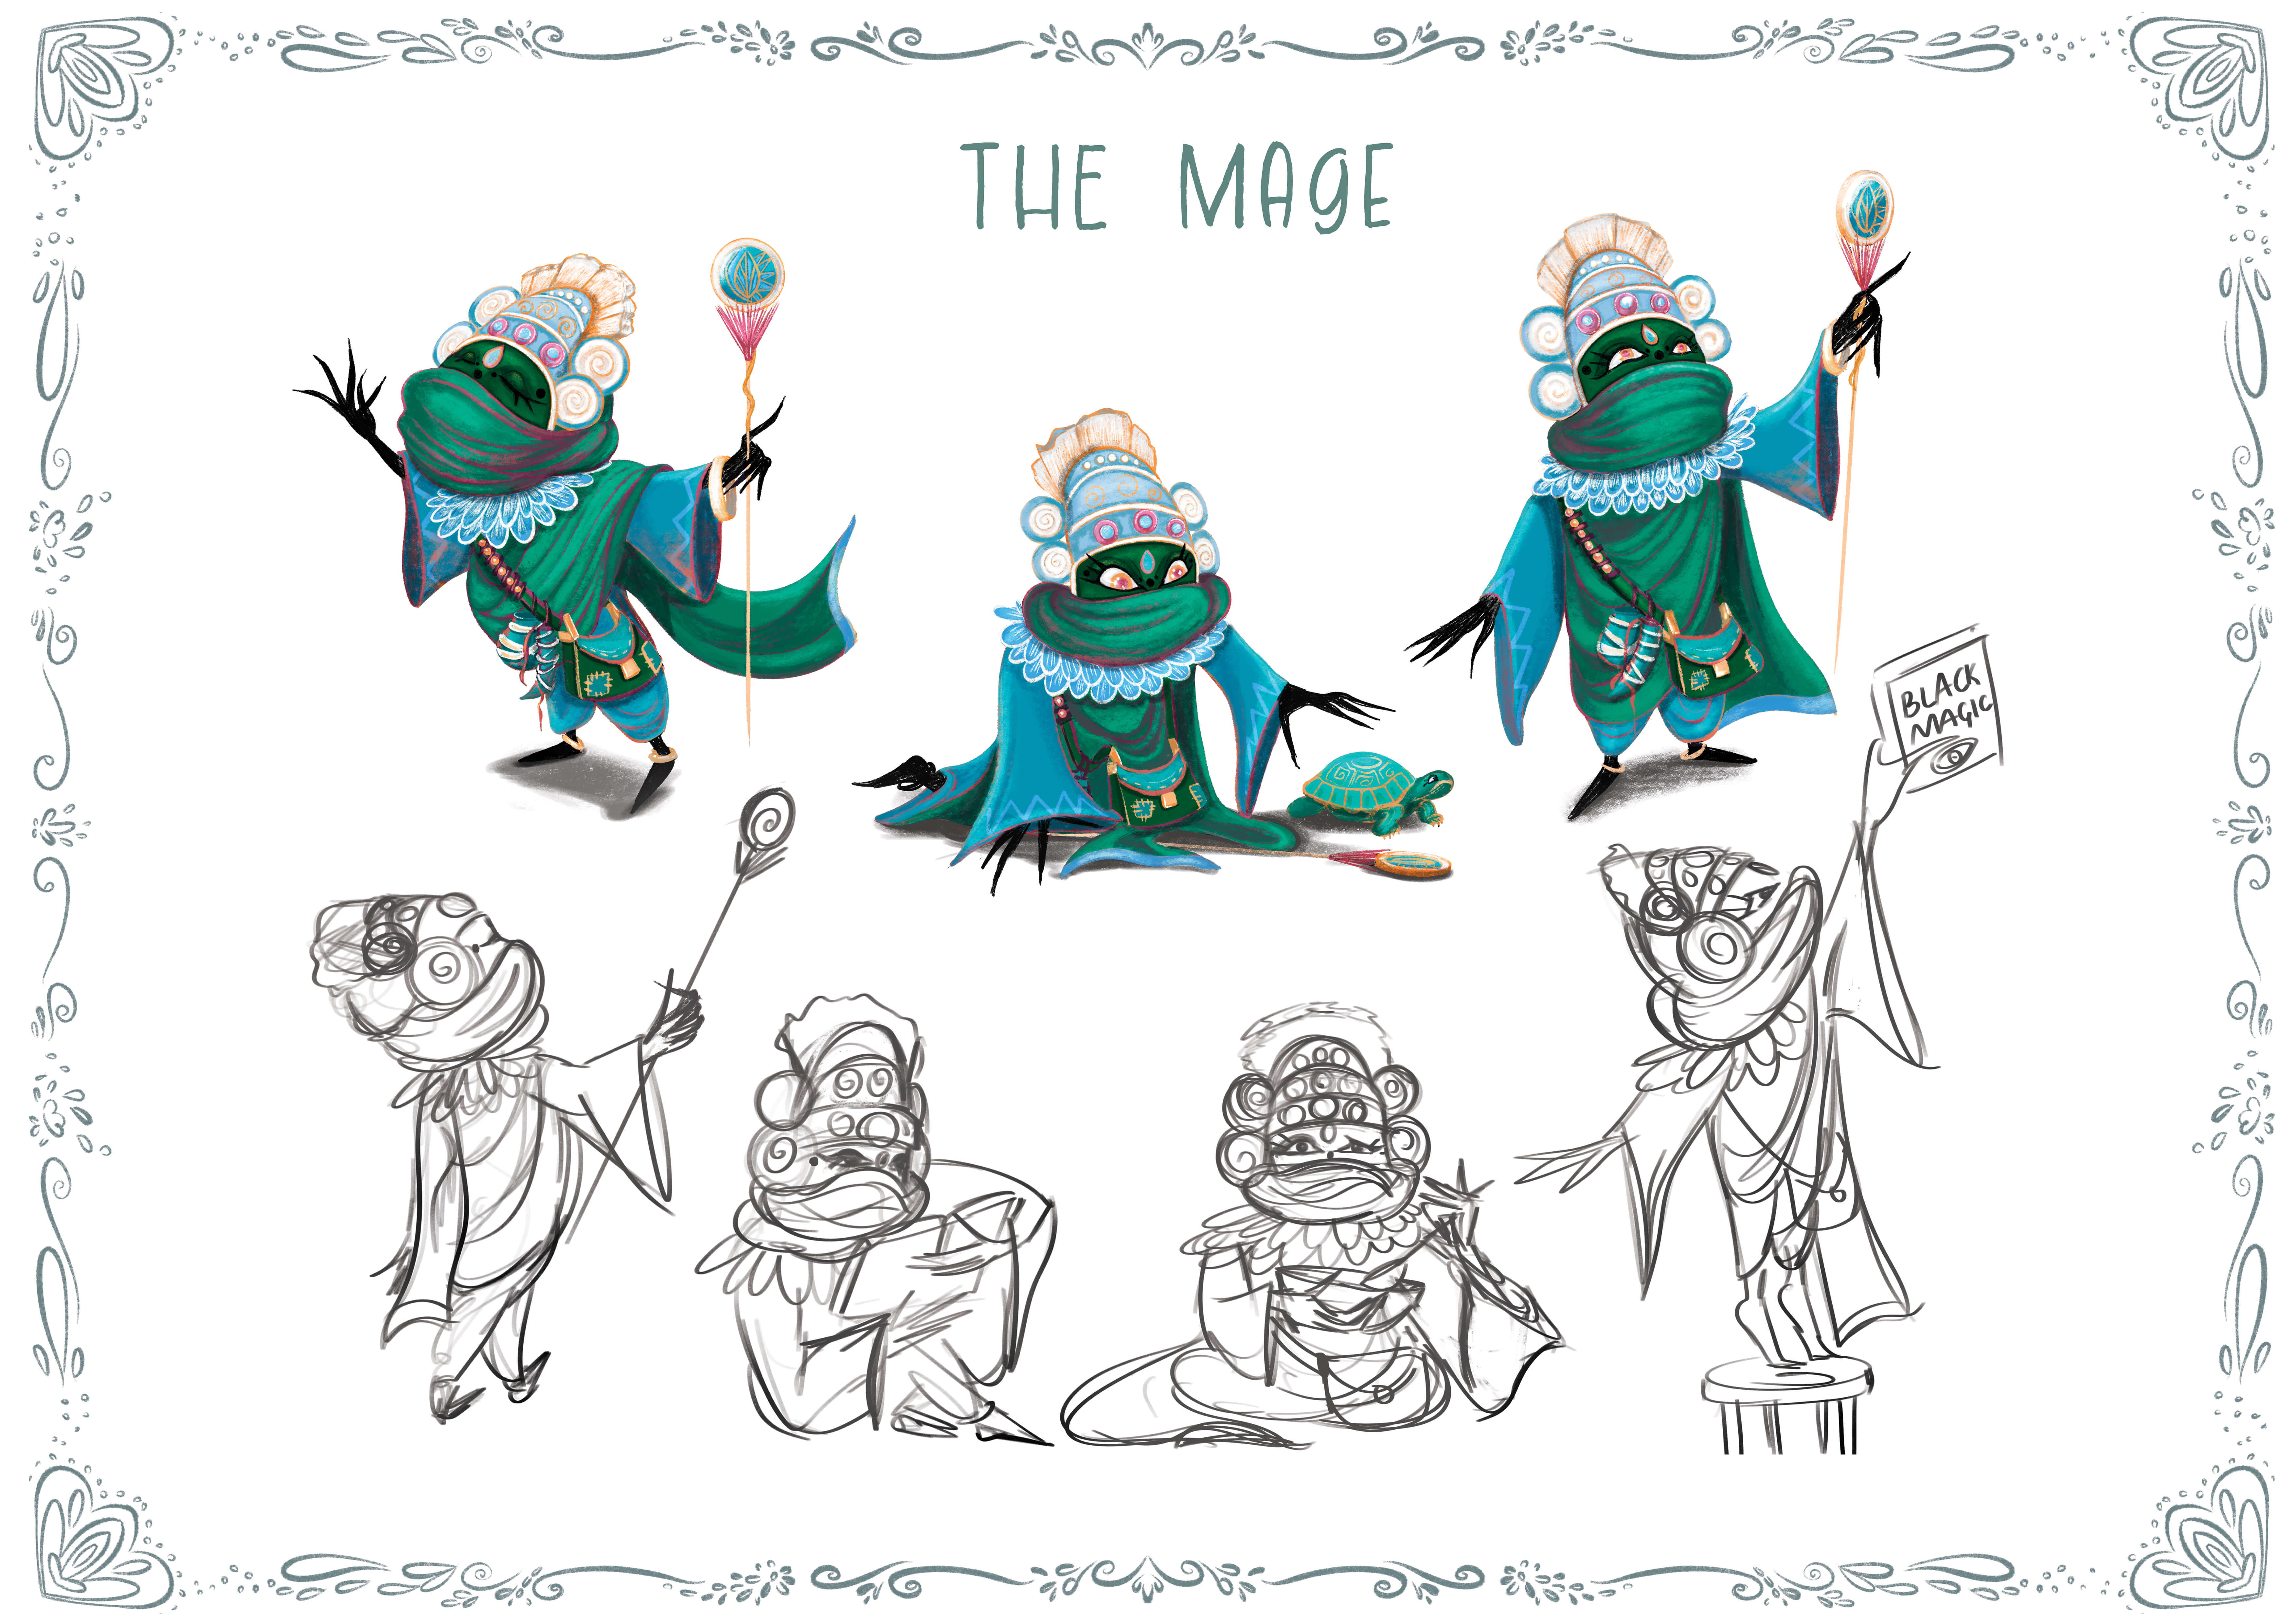 The Kind Mage – Character Development Sheet for the Pop-Up Book Project